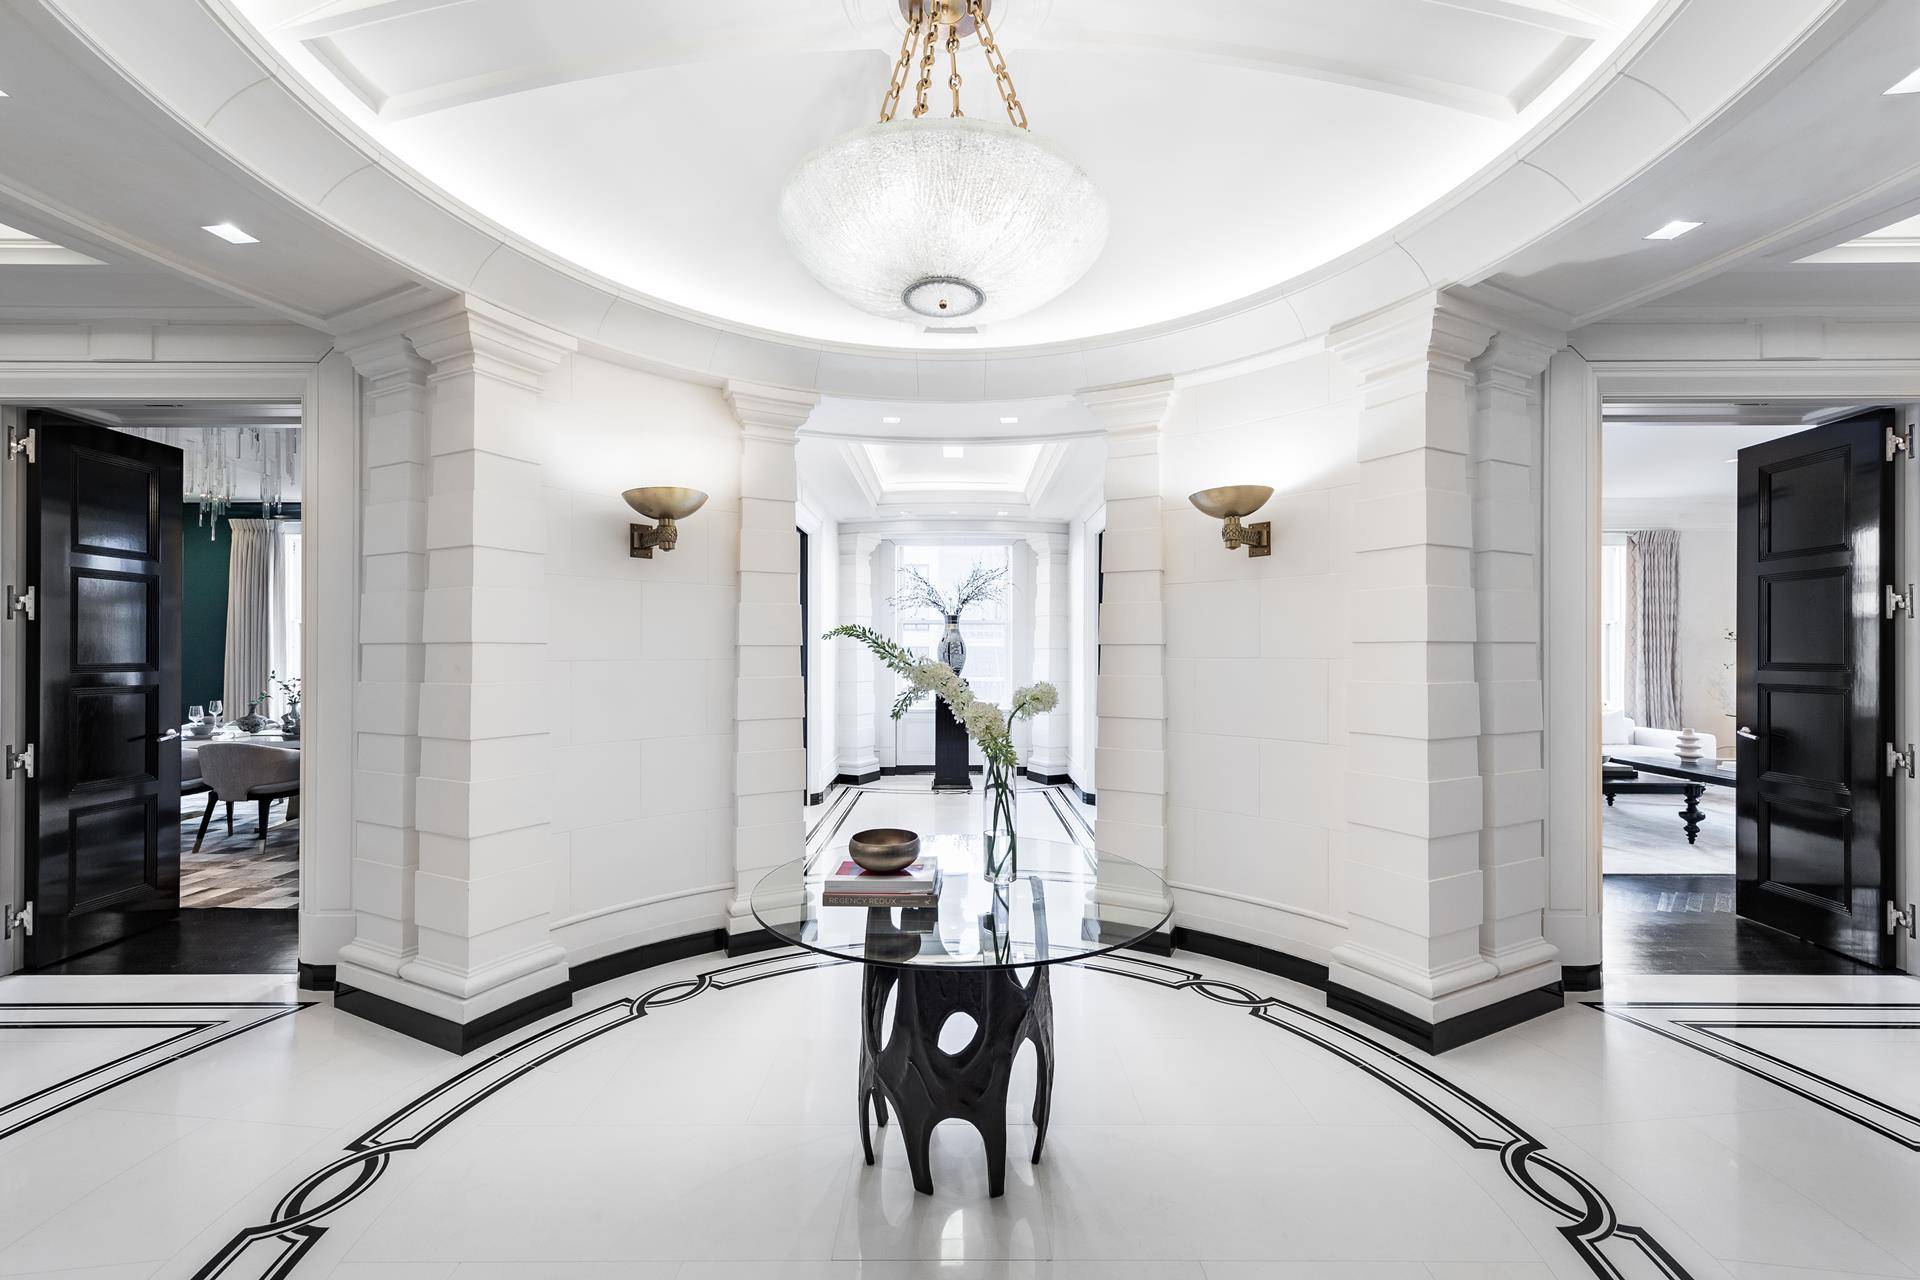 This lavish fifteen room residence, occupying the entire tenth floor of elegant prewar 550 Park Avenue, epitomizes old New York glamour and fine living while offering the latest bespoke amenities, ...